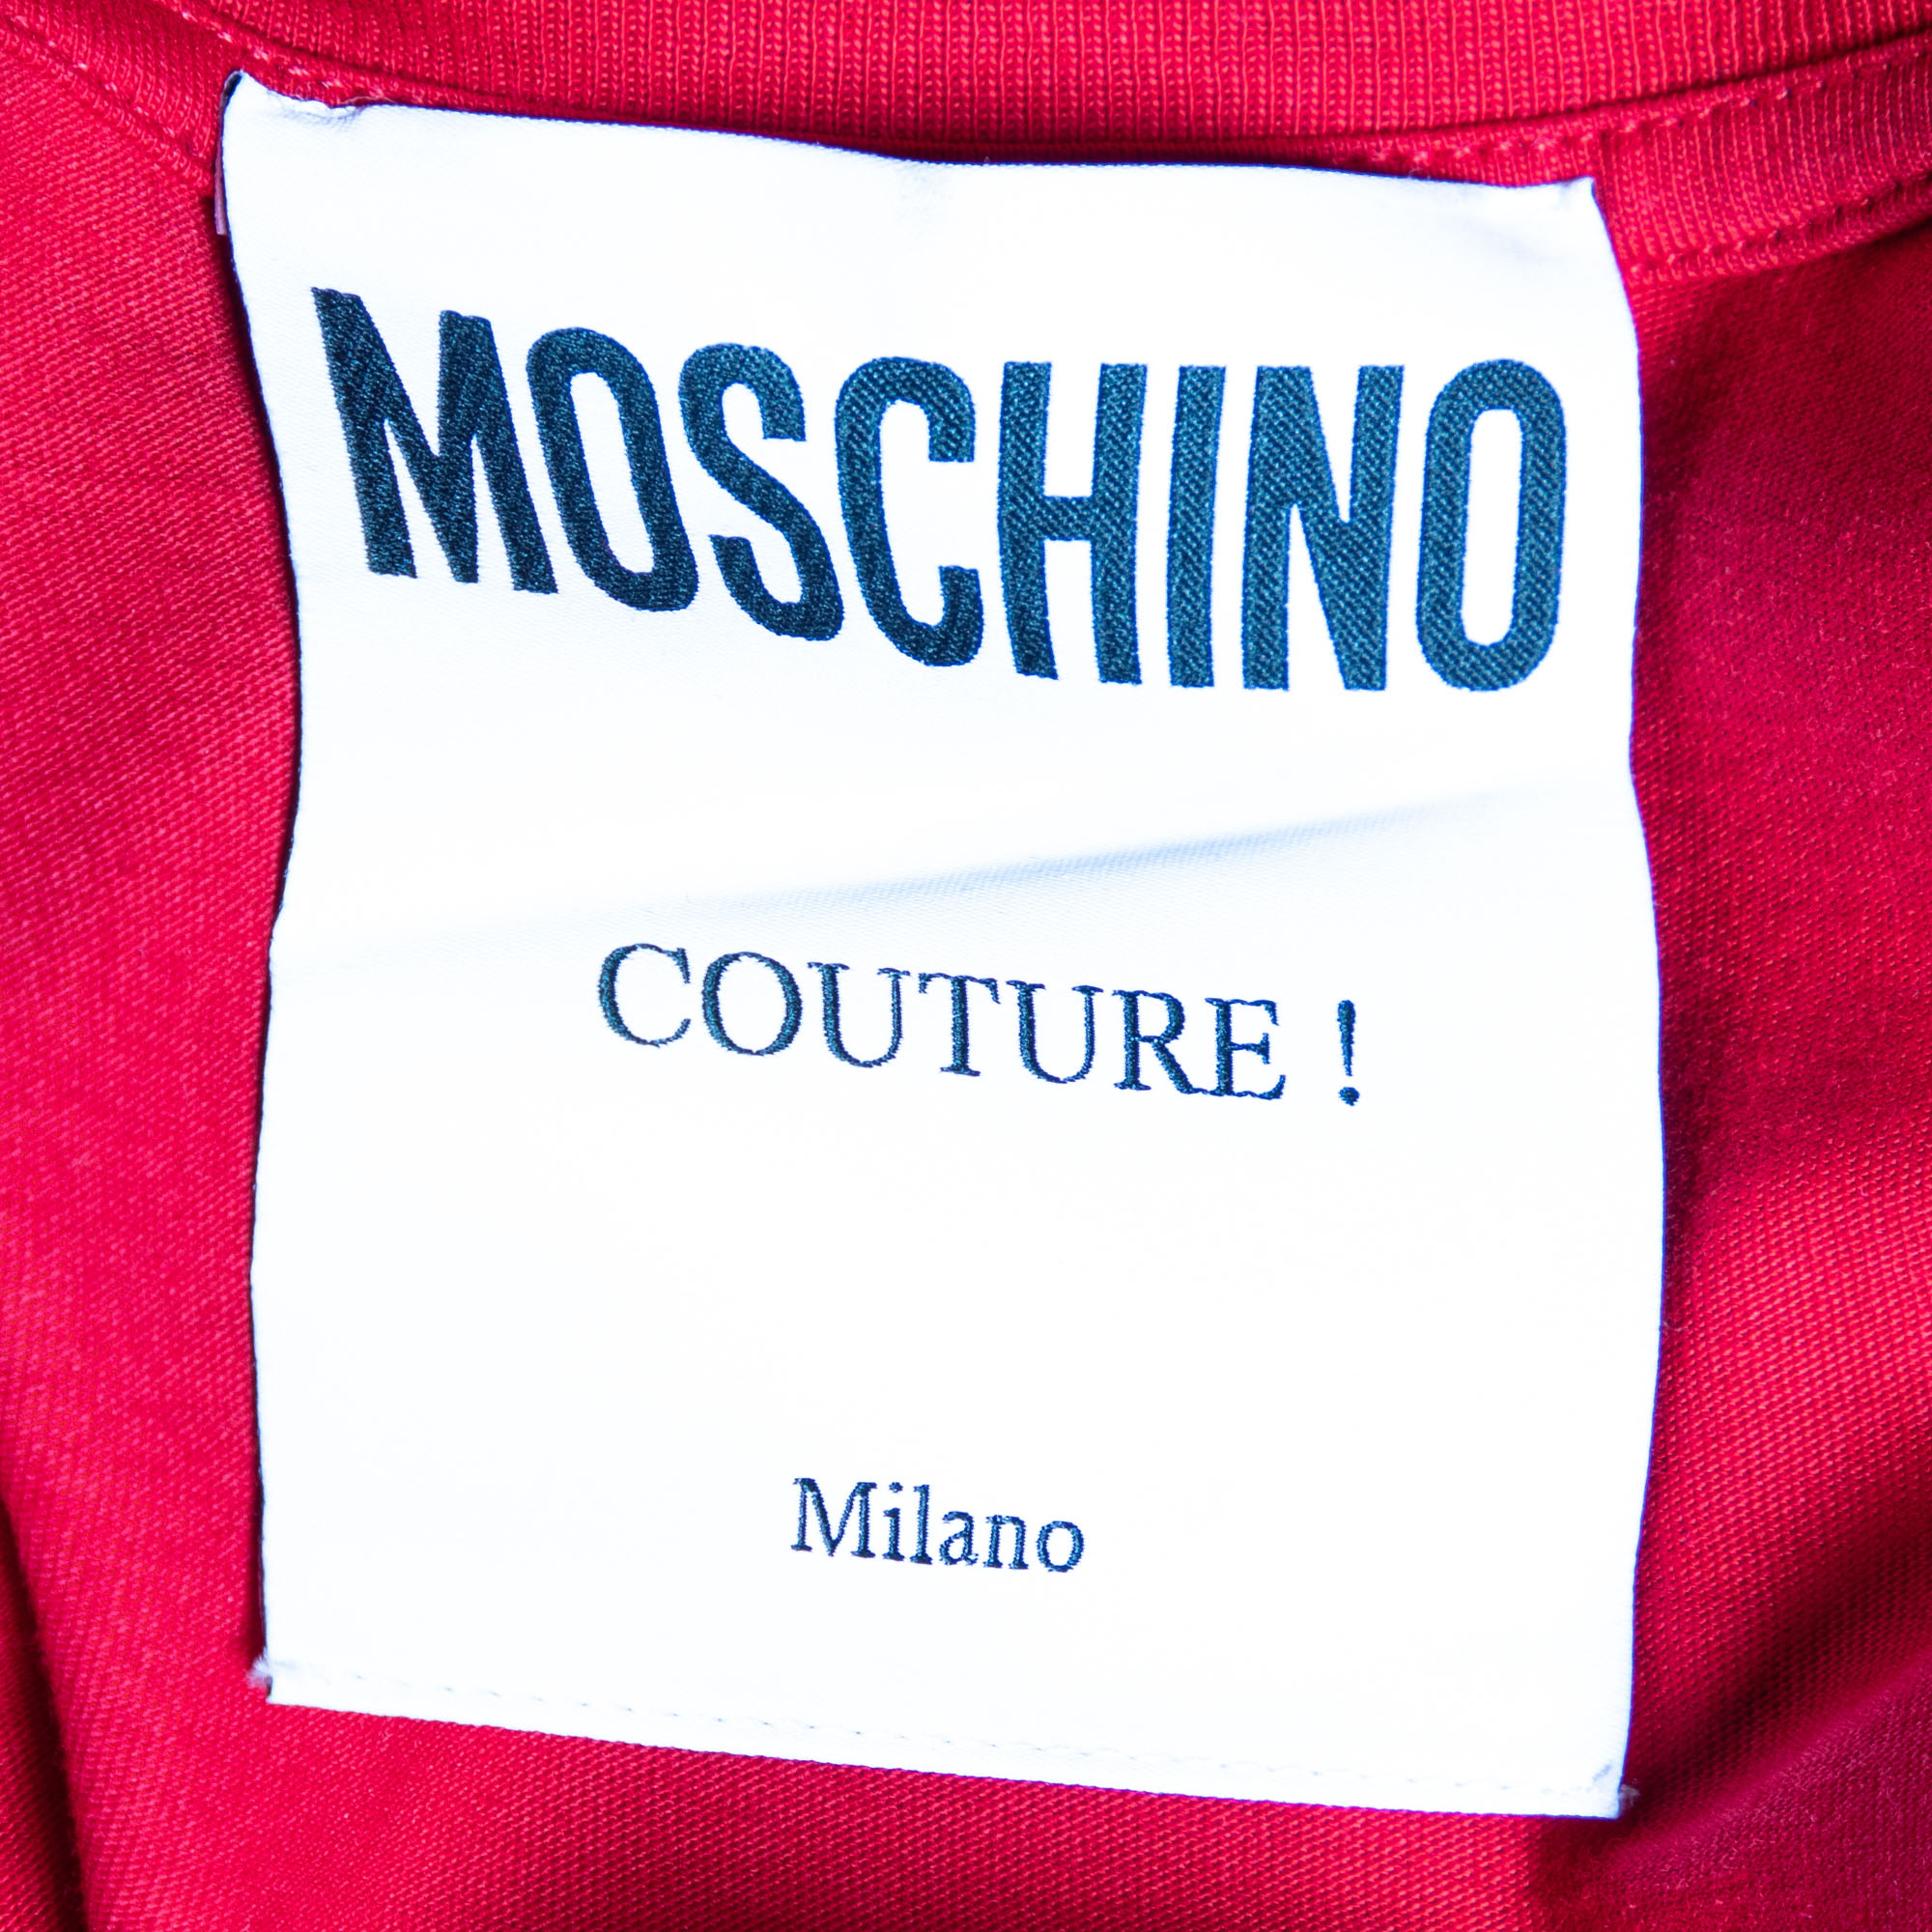 Moschino Couture Red Cotton Knit Logo Embroidered Oversized T-Shirt XXS